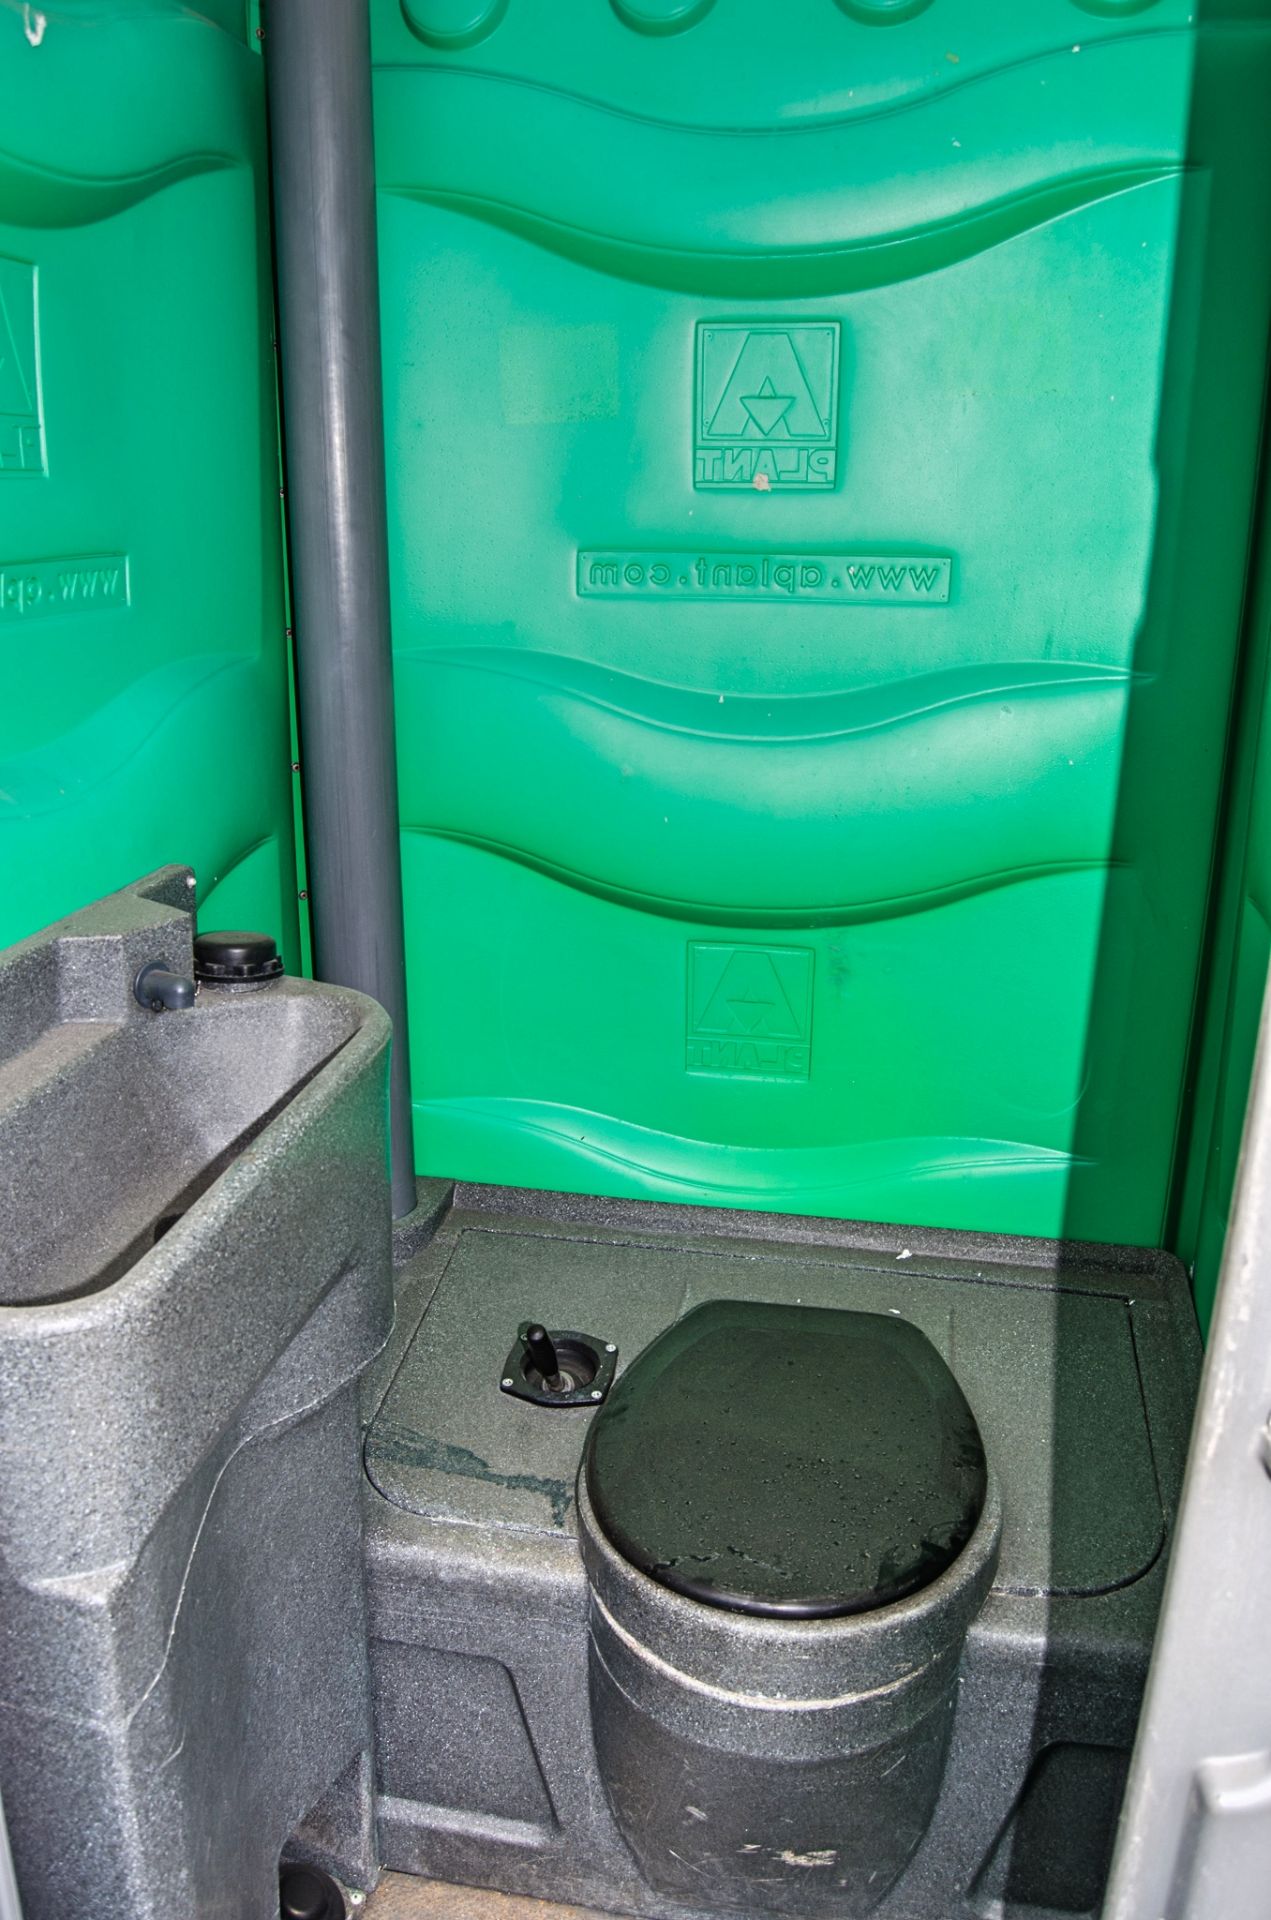 Plastic portable toilet A415469 - Image 3 of 3